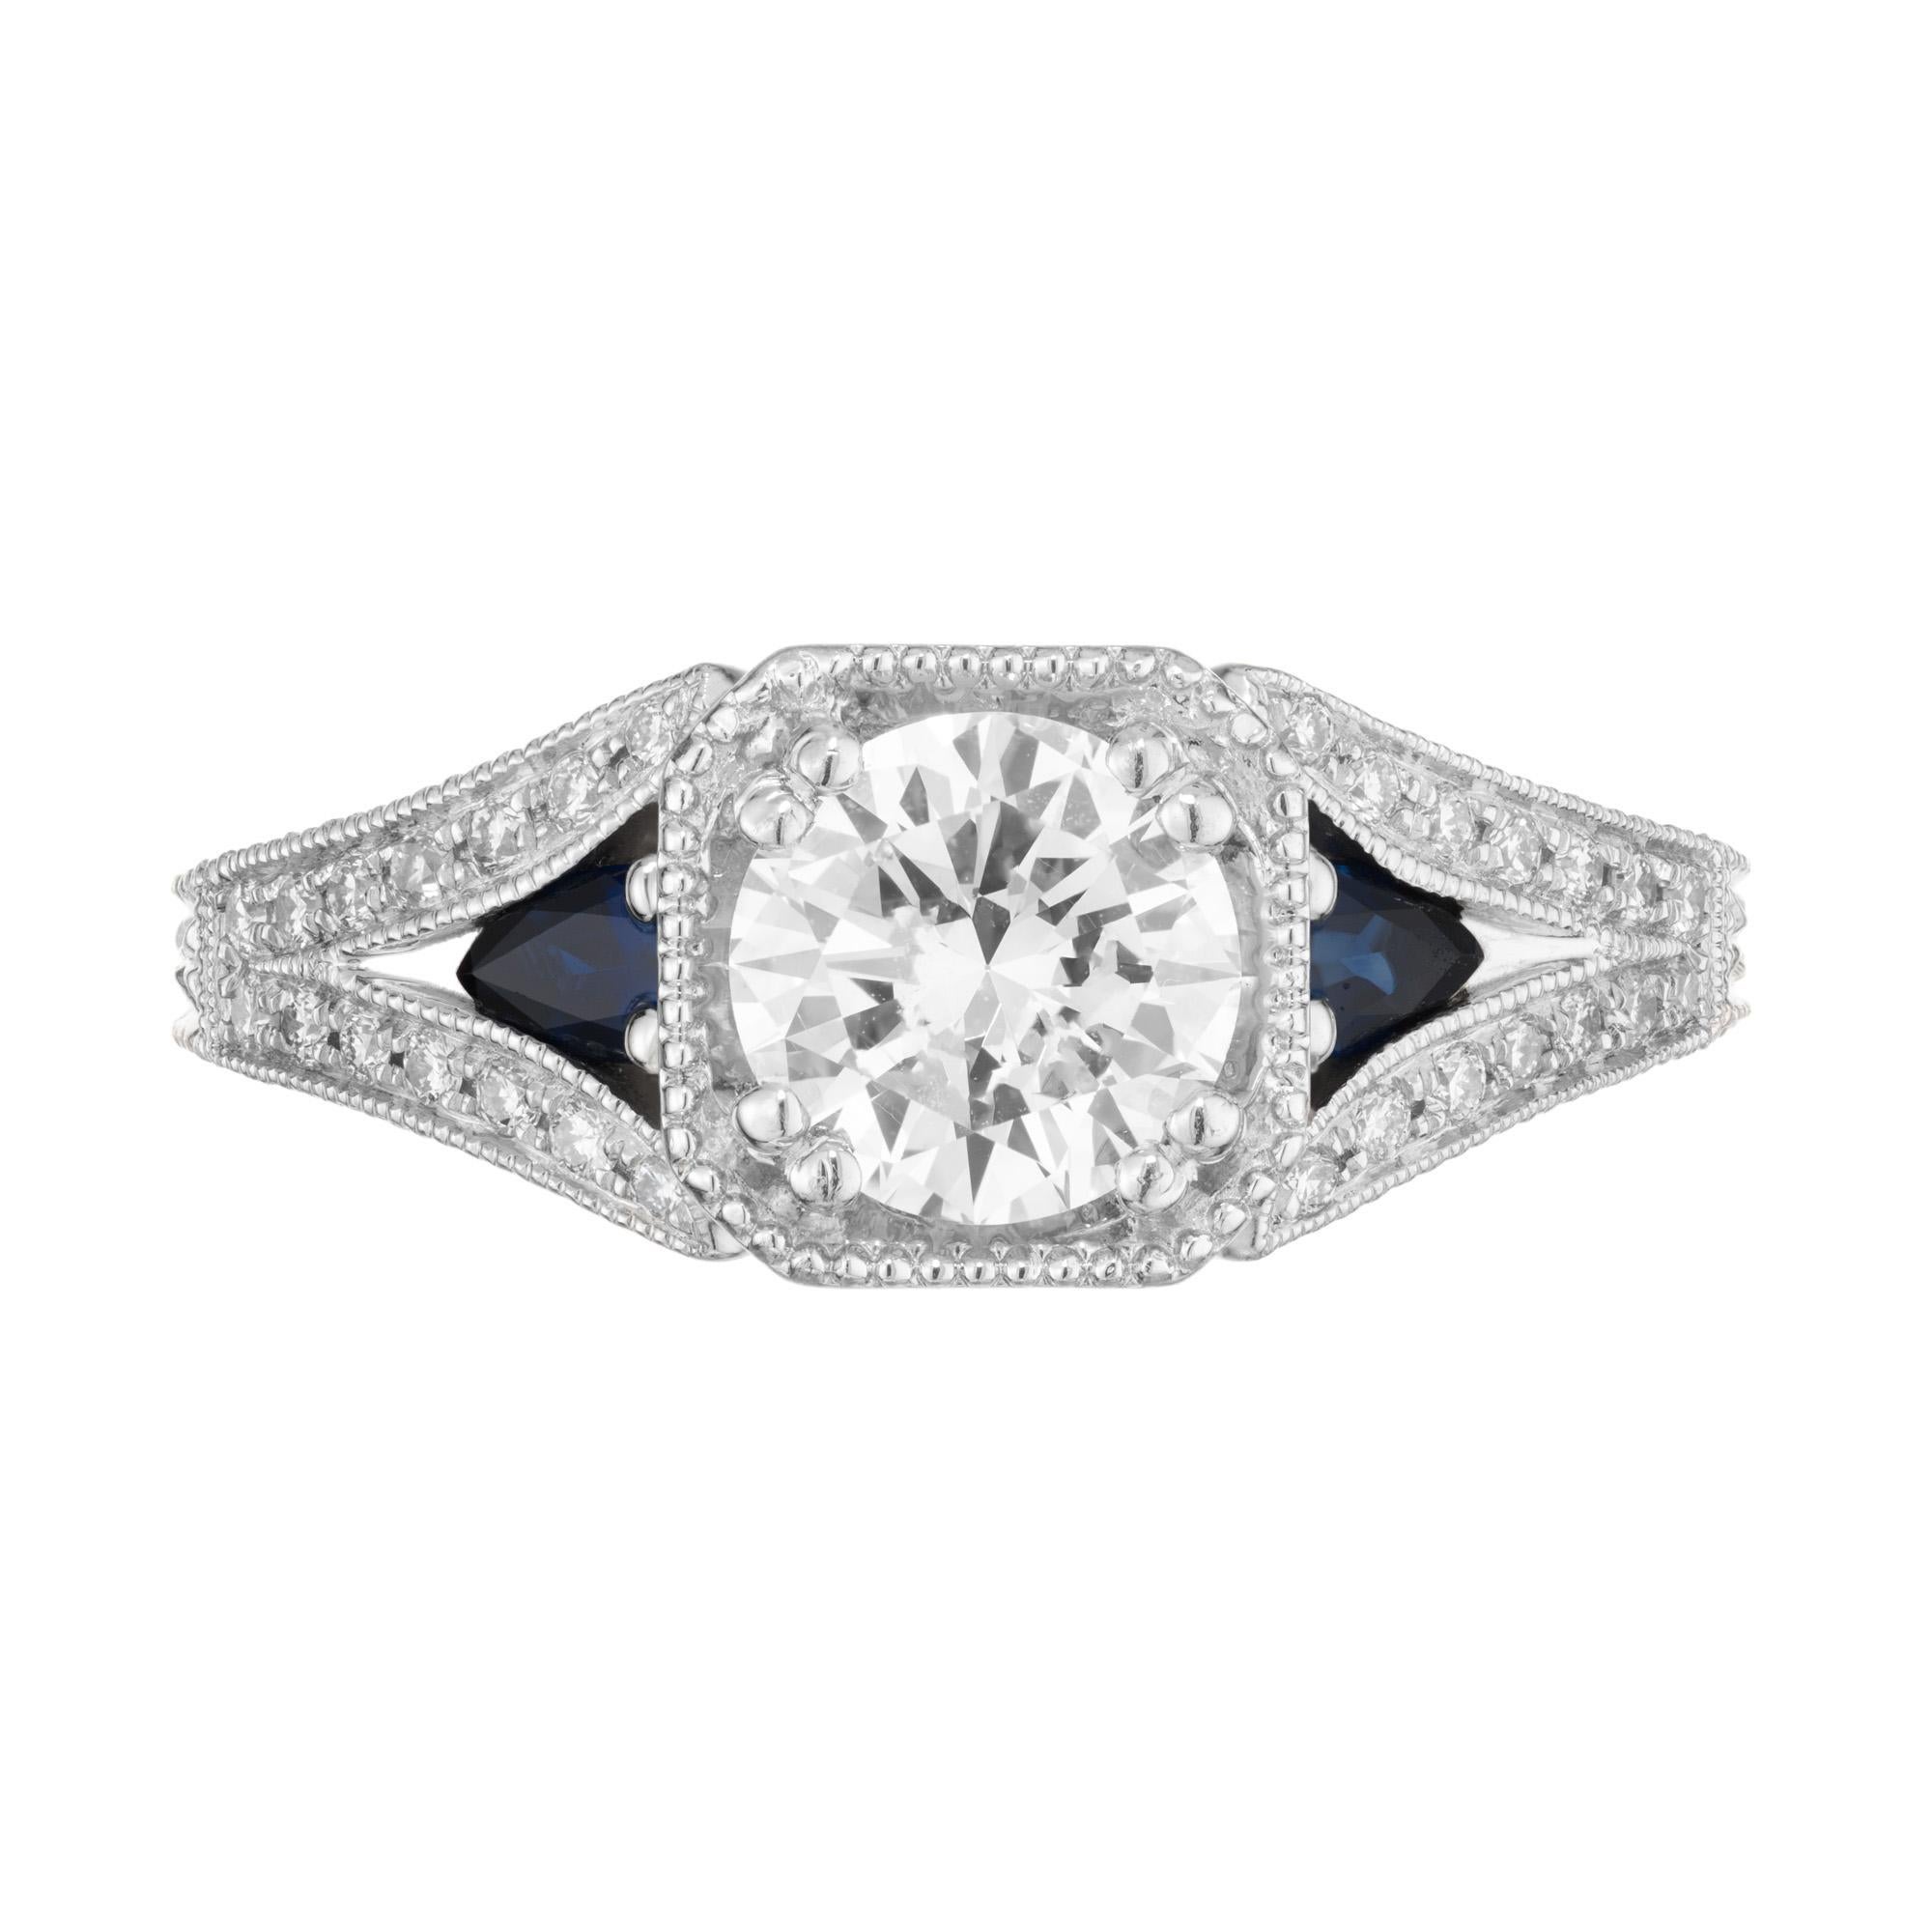 Antique Inspired diamond and sapphire engagement ring. GIA certified transitional cut diamond center stone mounted in a Platinum setting and accented by 2 pear shape side sapphires. The three main stones are also accented by 28 round brilliant cut